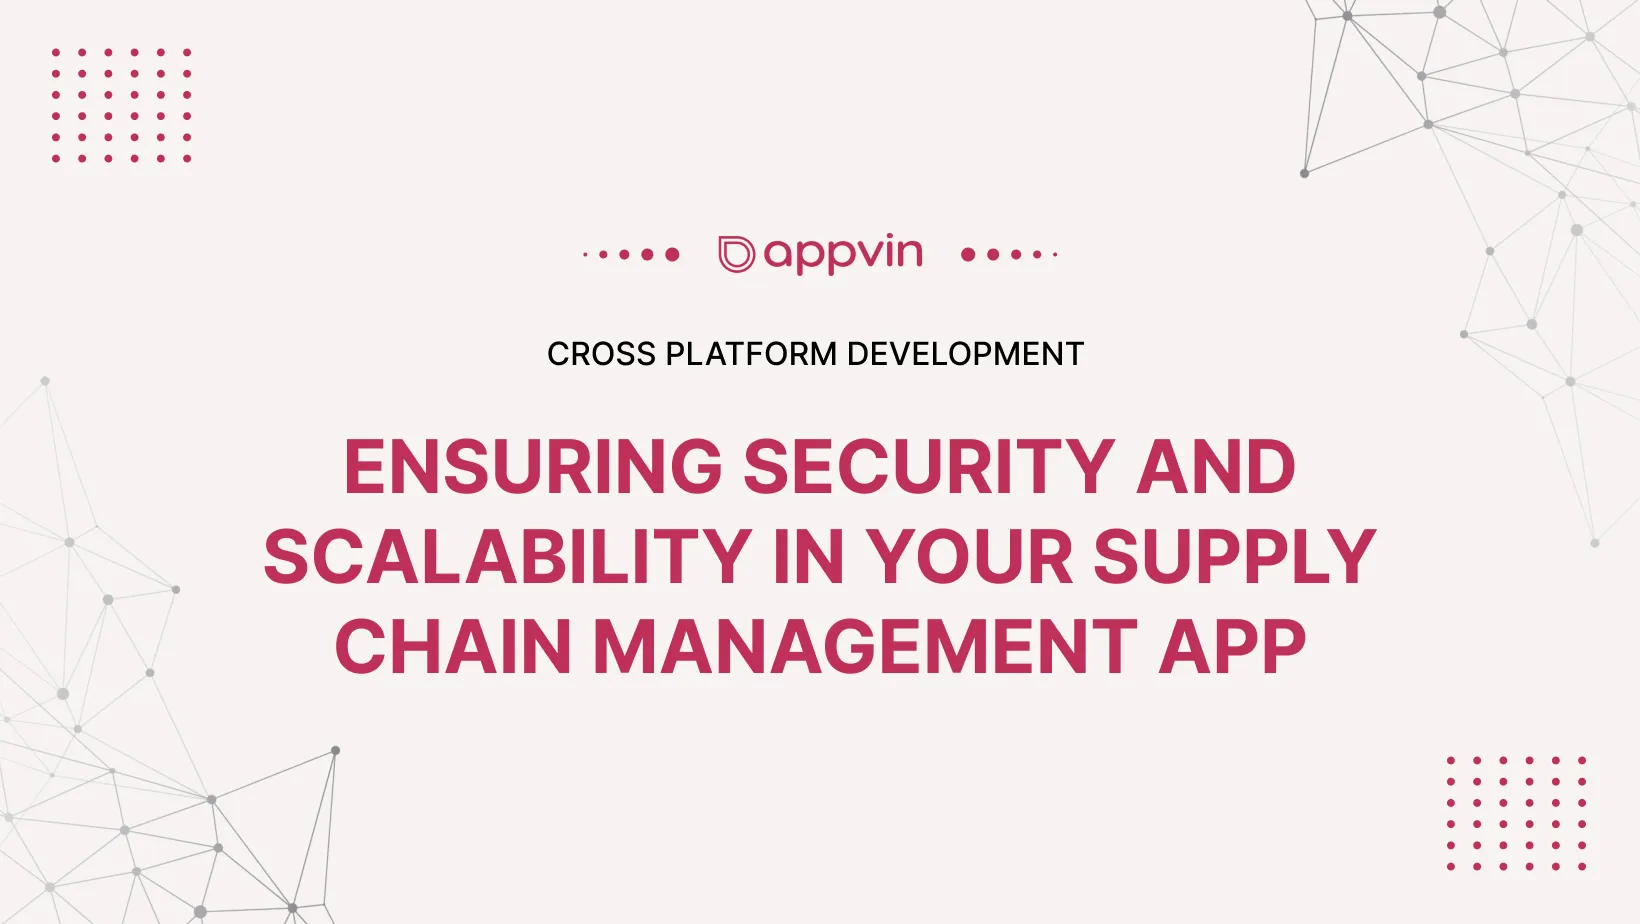 Ensuring security and scalability in your supply chain management app